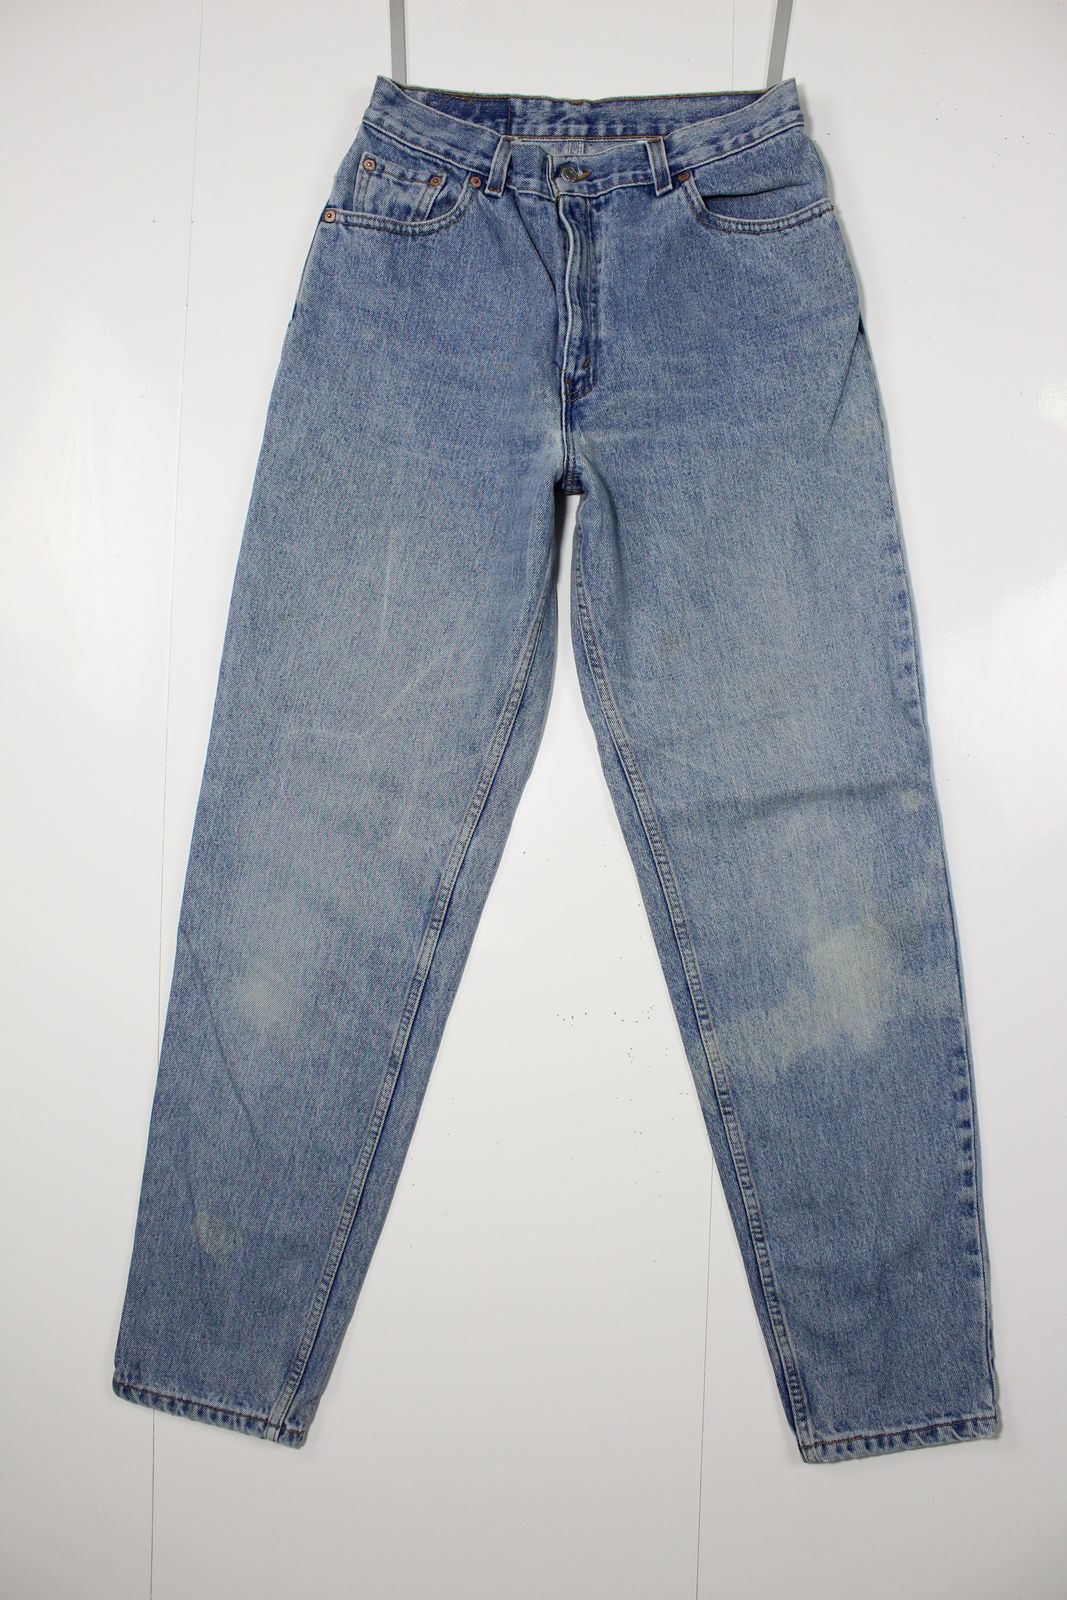 Levi's 550 Relaxed Fit Tg. L Denim Made In USA Jeans Vintage